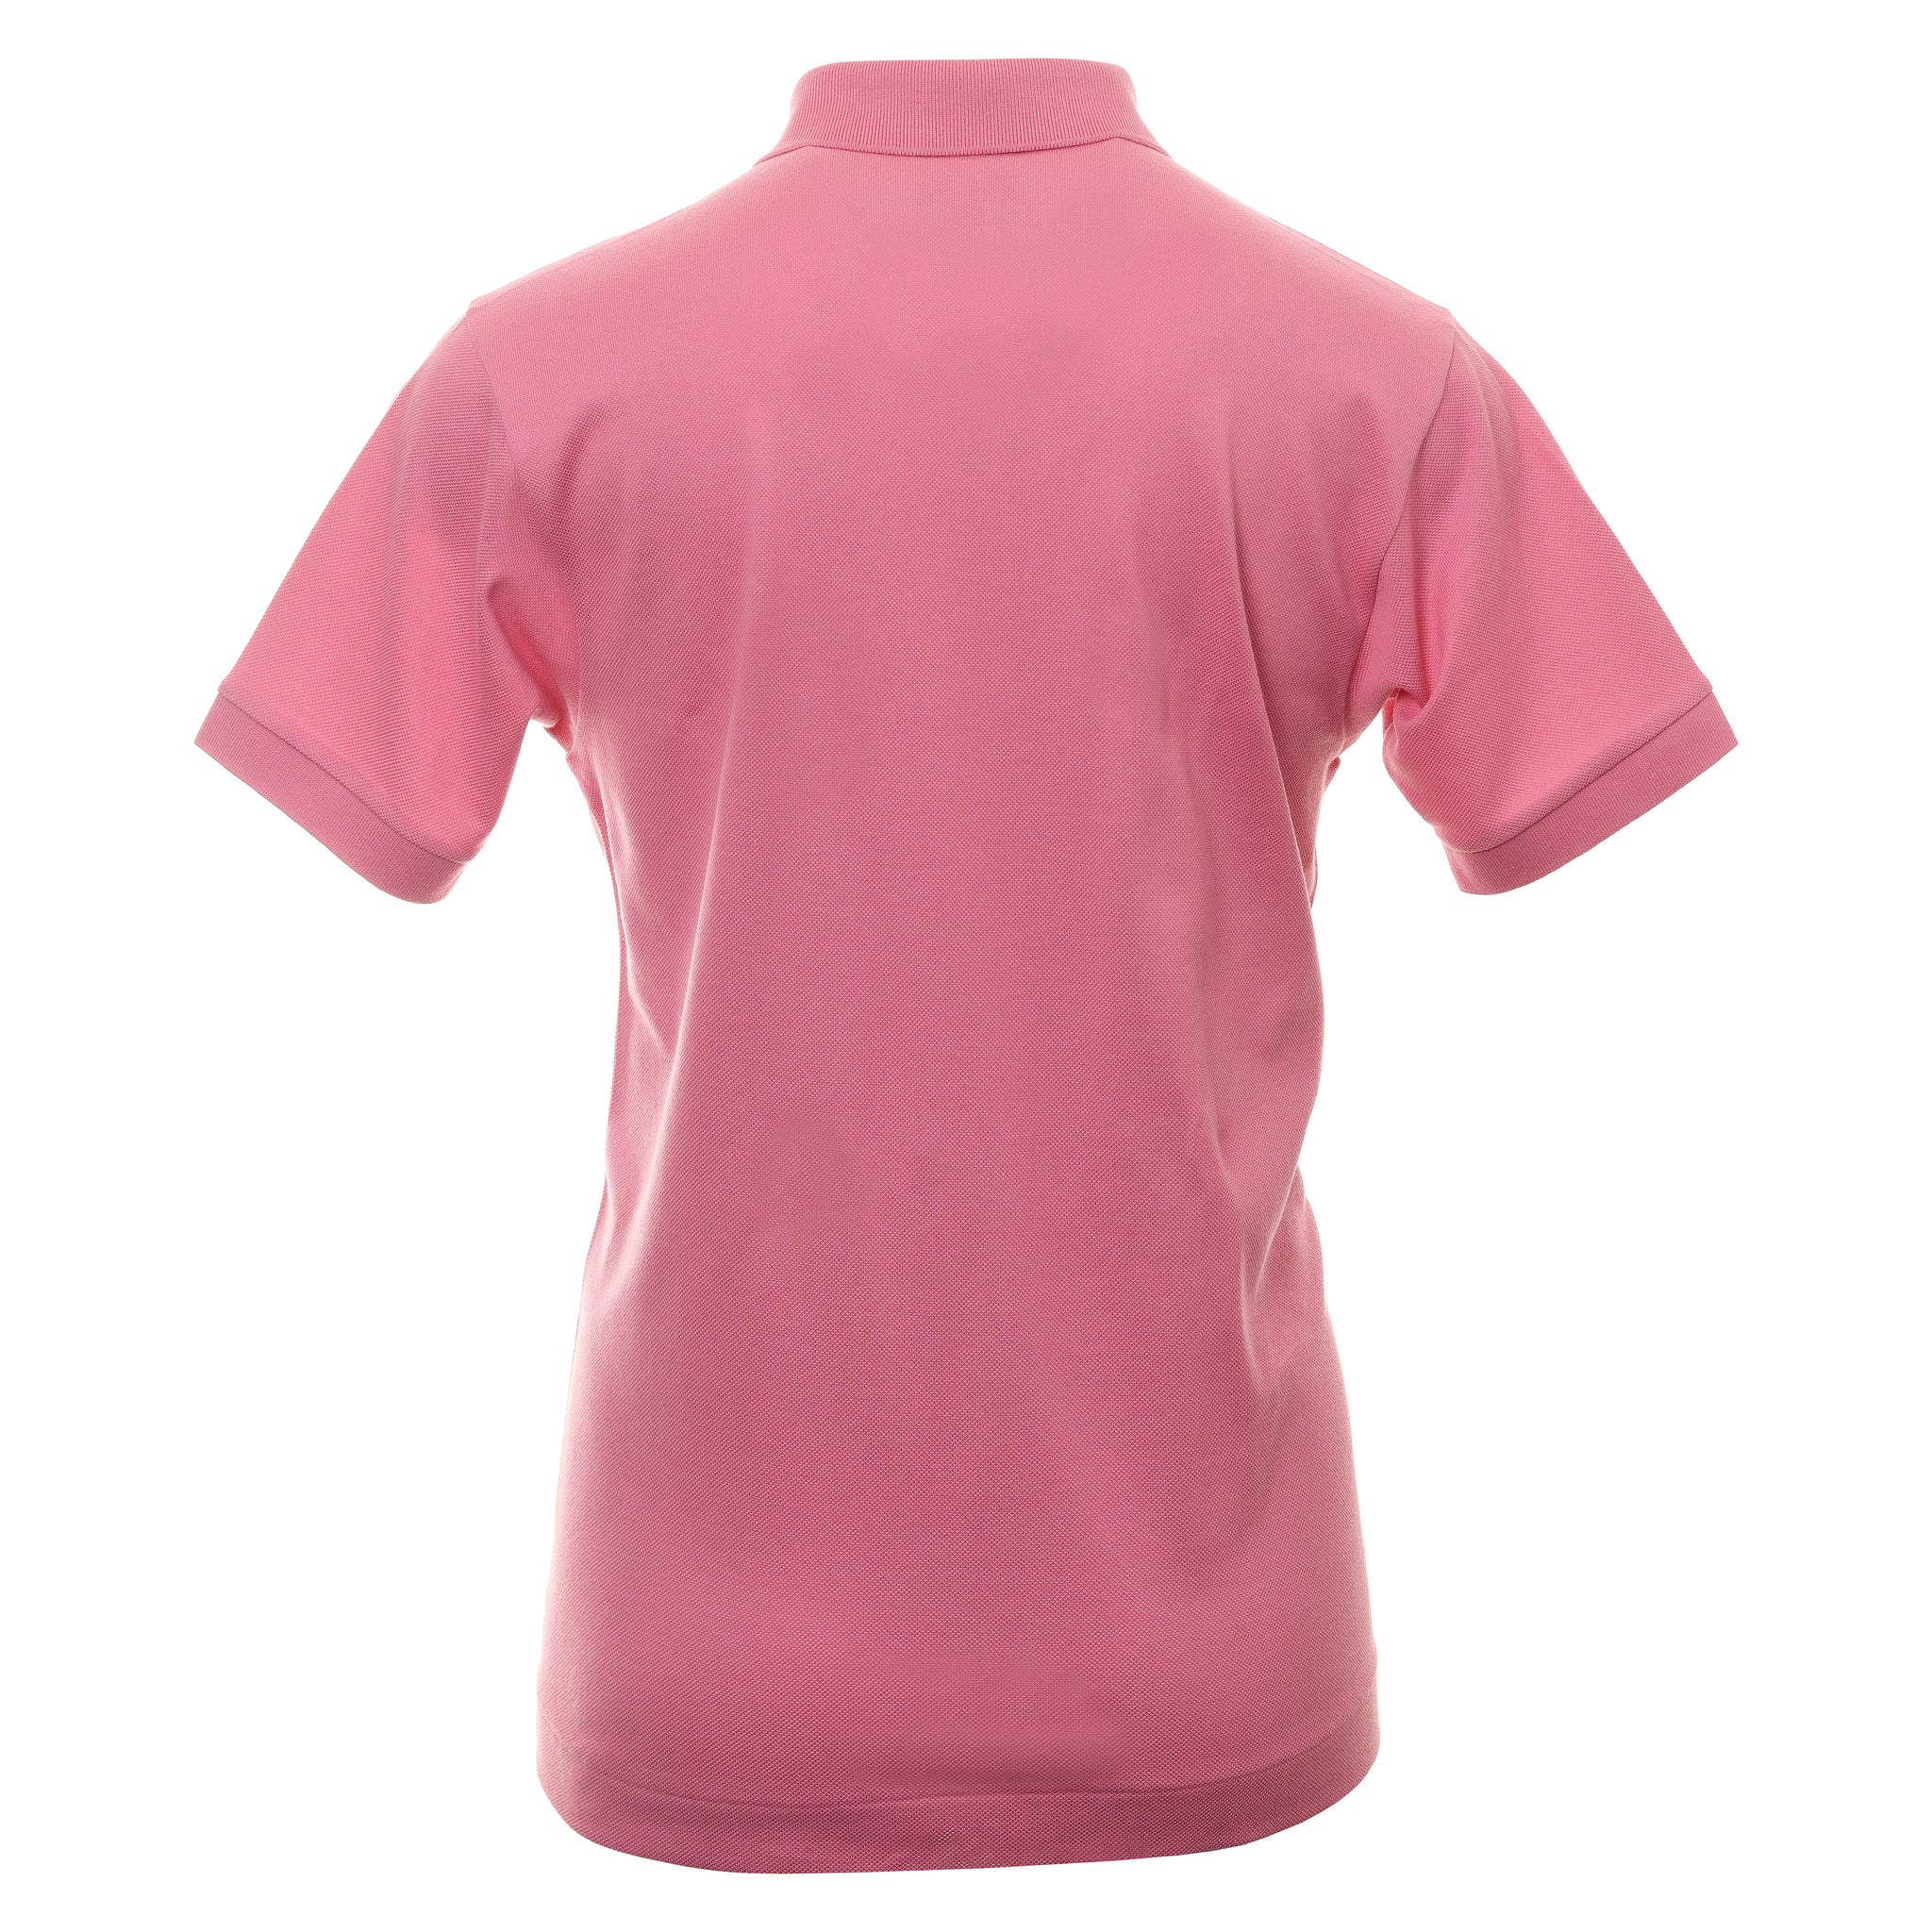 copy-of-lacoste-classic-pique-polo-shirt-l1212-reseda-pink-2r3-function18